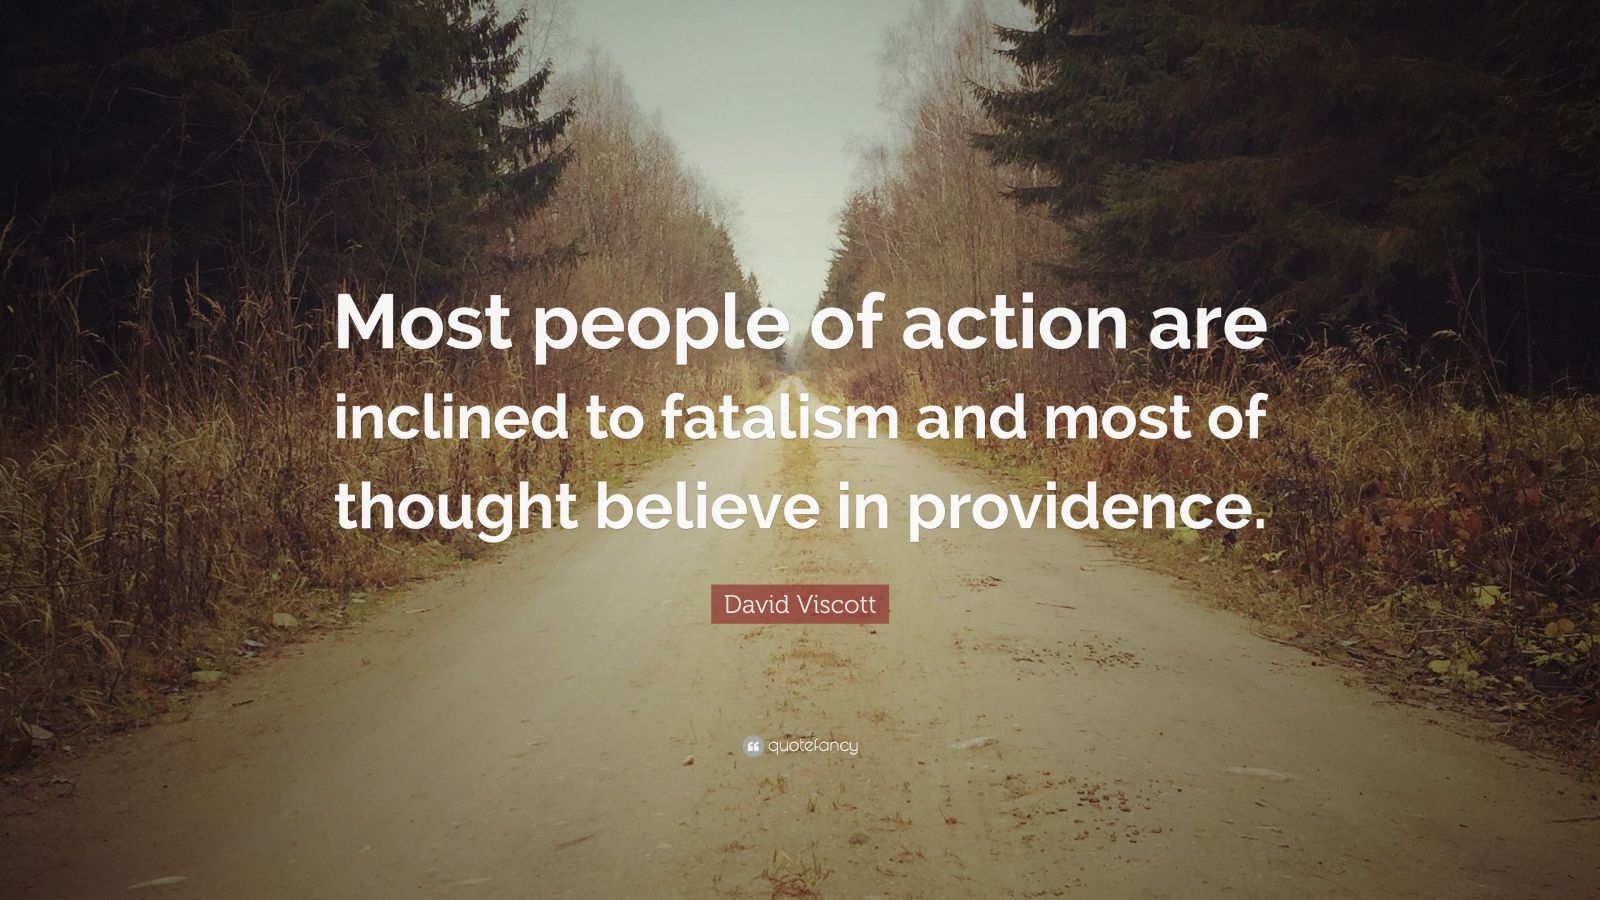 David Viscott Quote: “Most people of action are inclined to fatalism ...